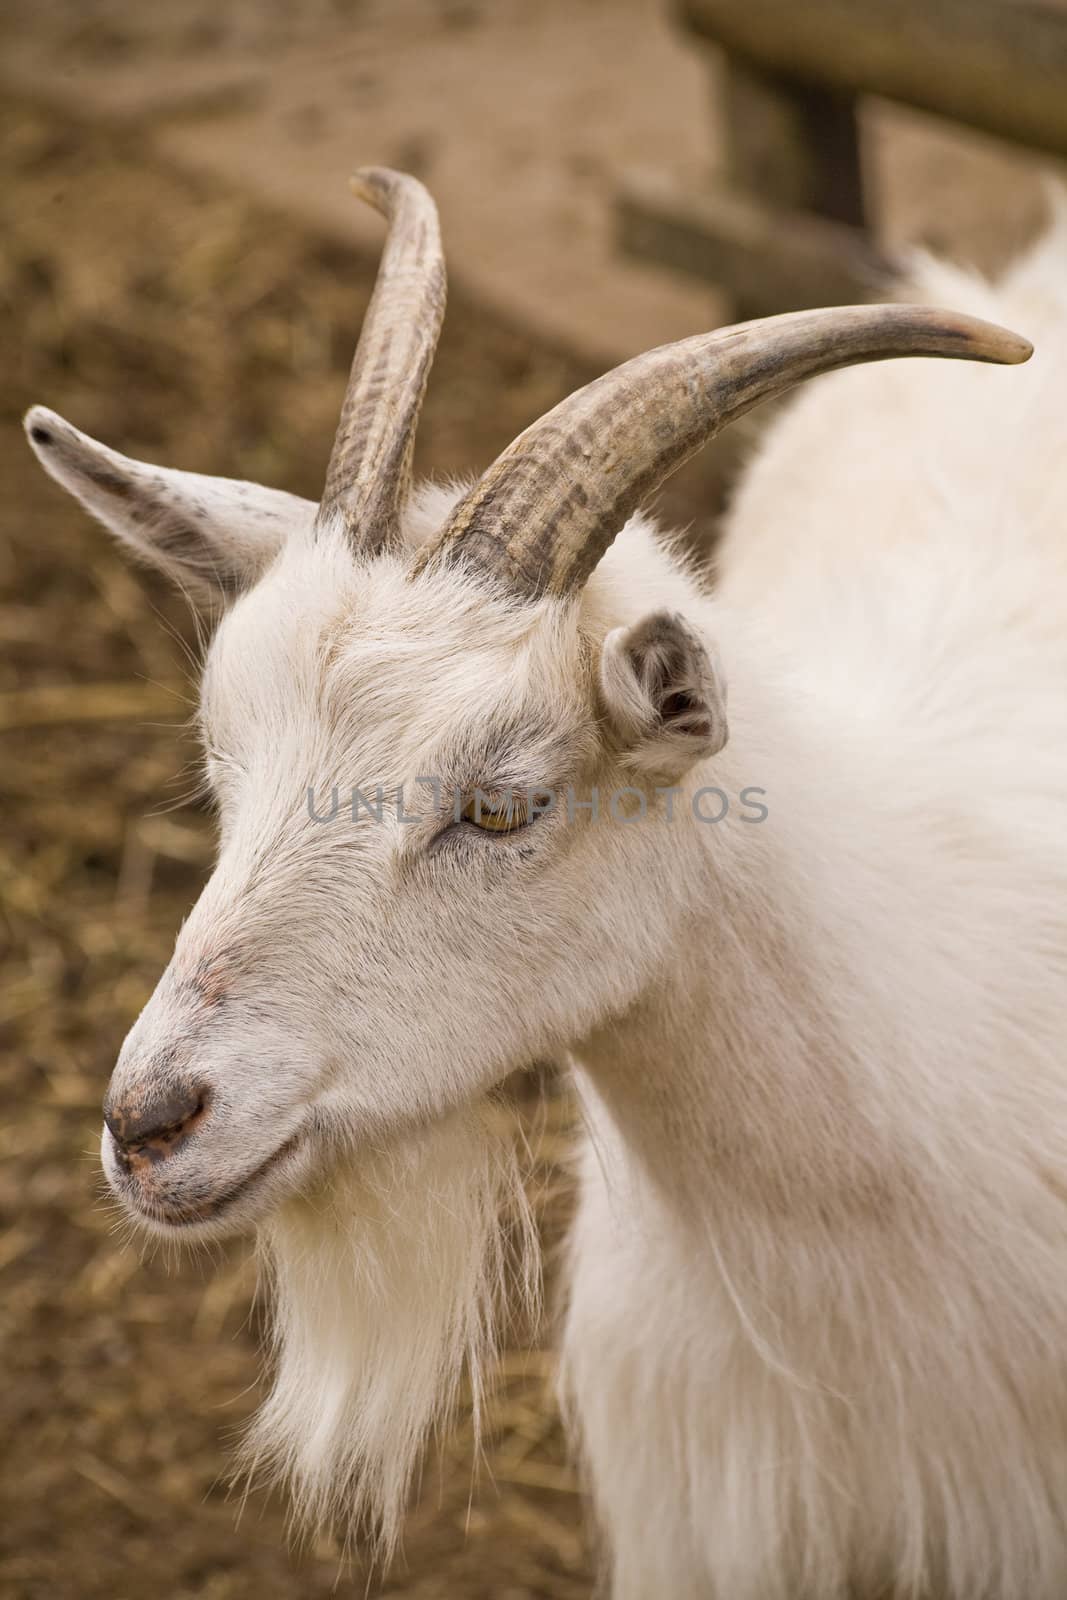 A head shot of a white goat with a beard
